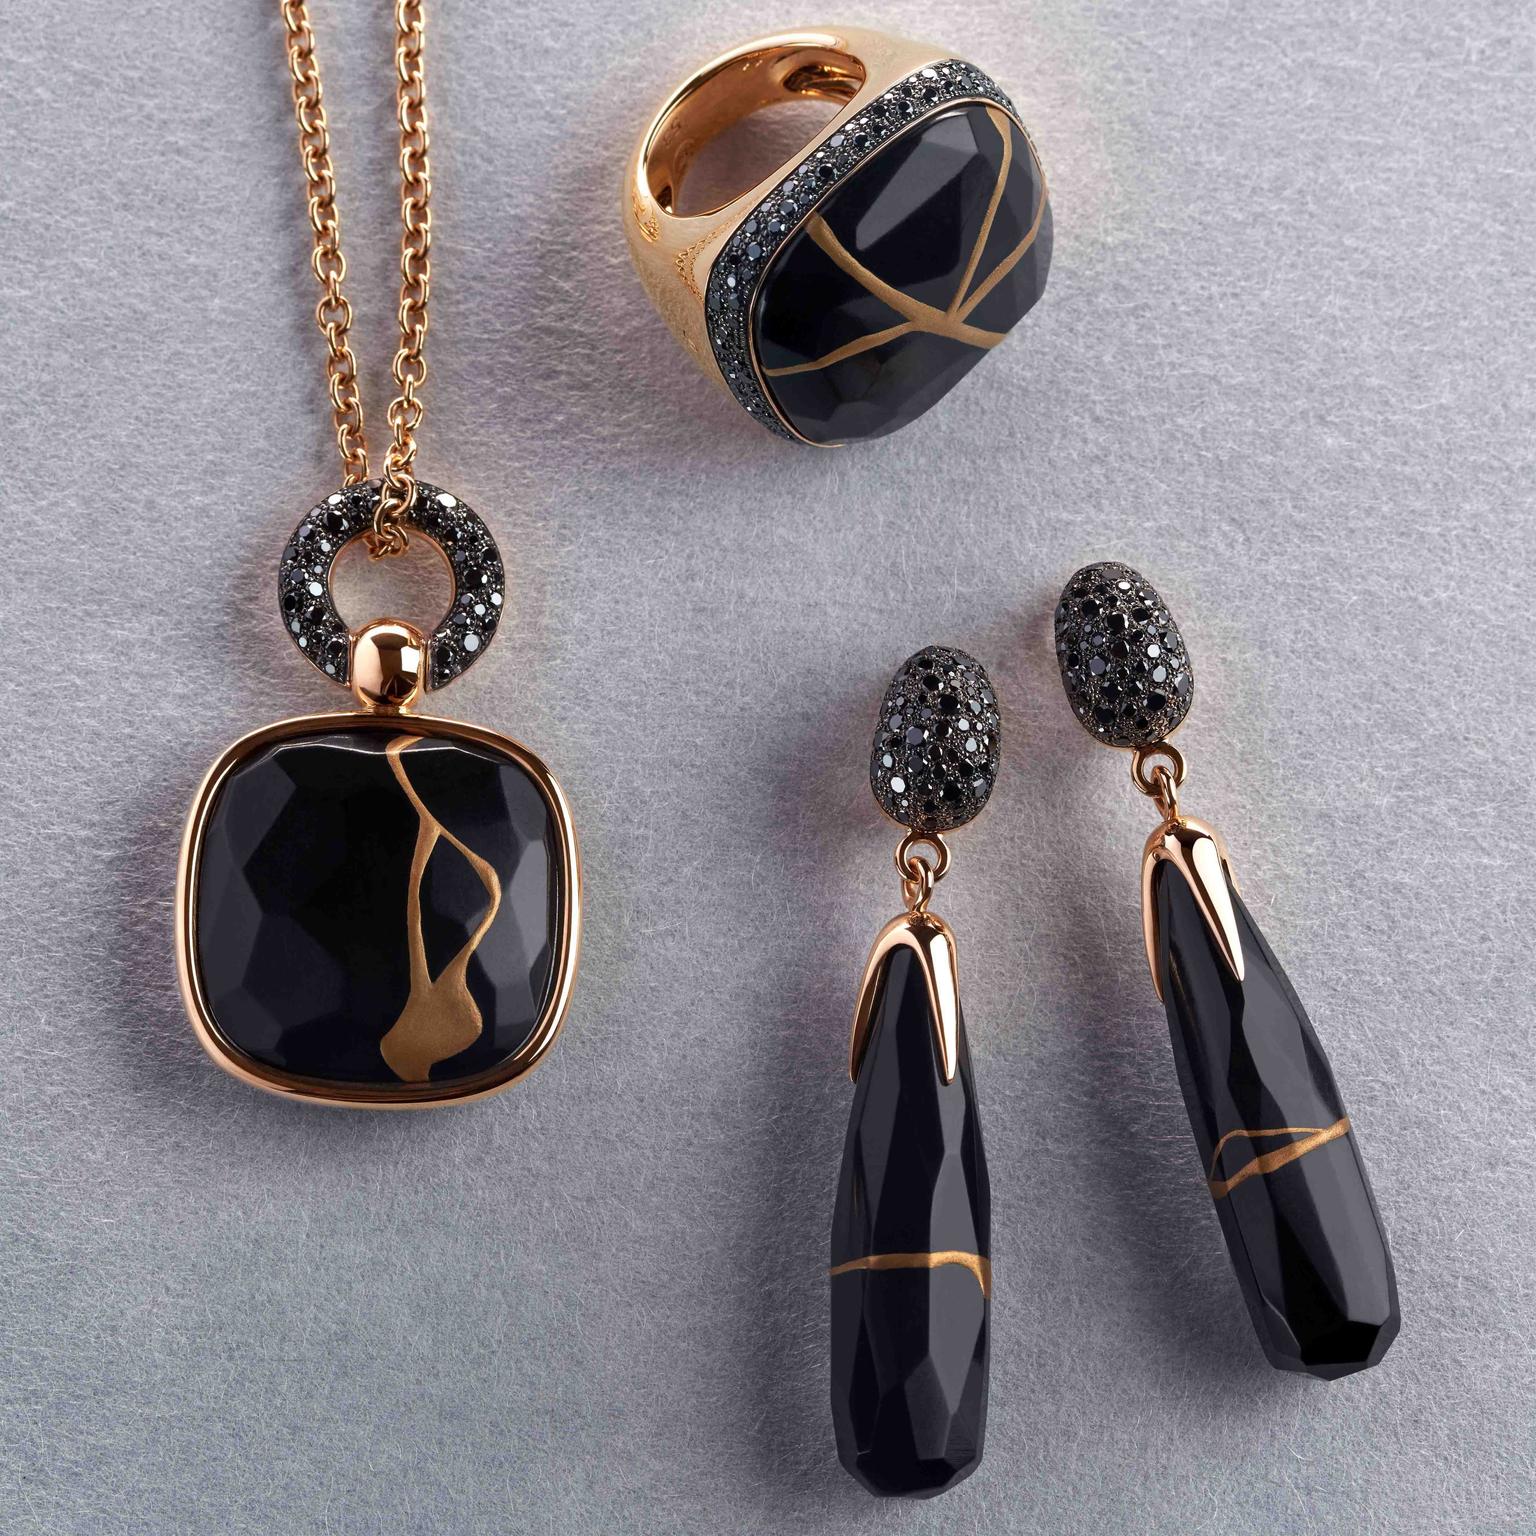 Pomellato Kintsugi Collection_ring, earrings and pendant in rose gold with jet and black diamonds